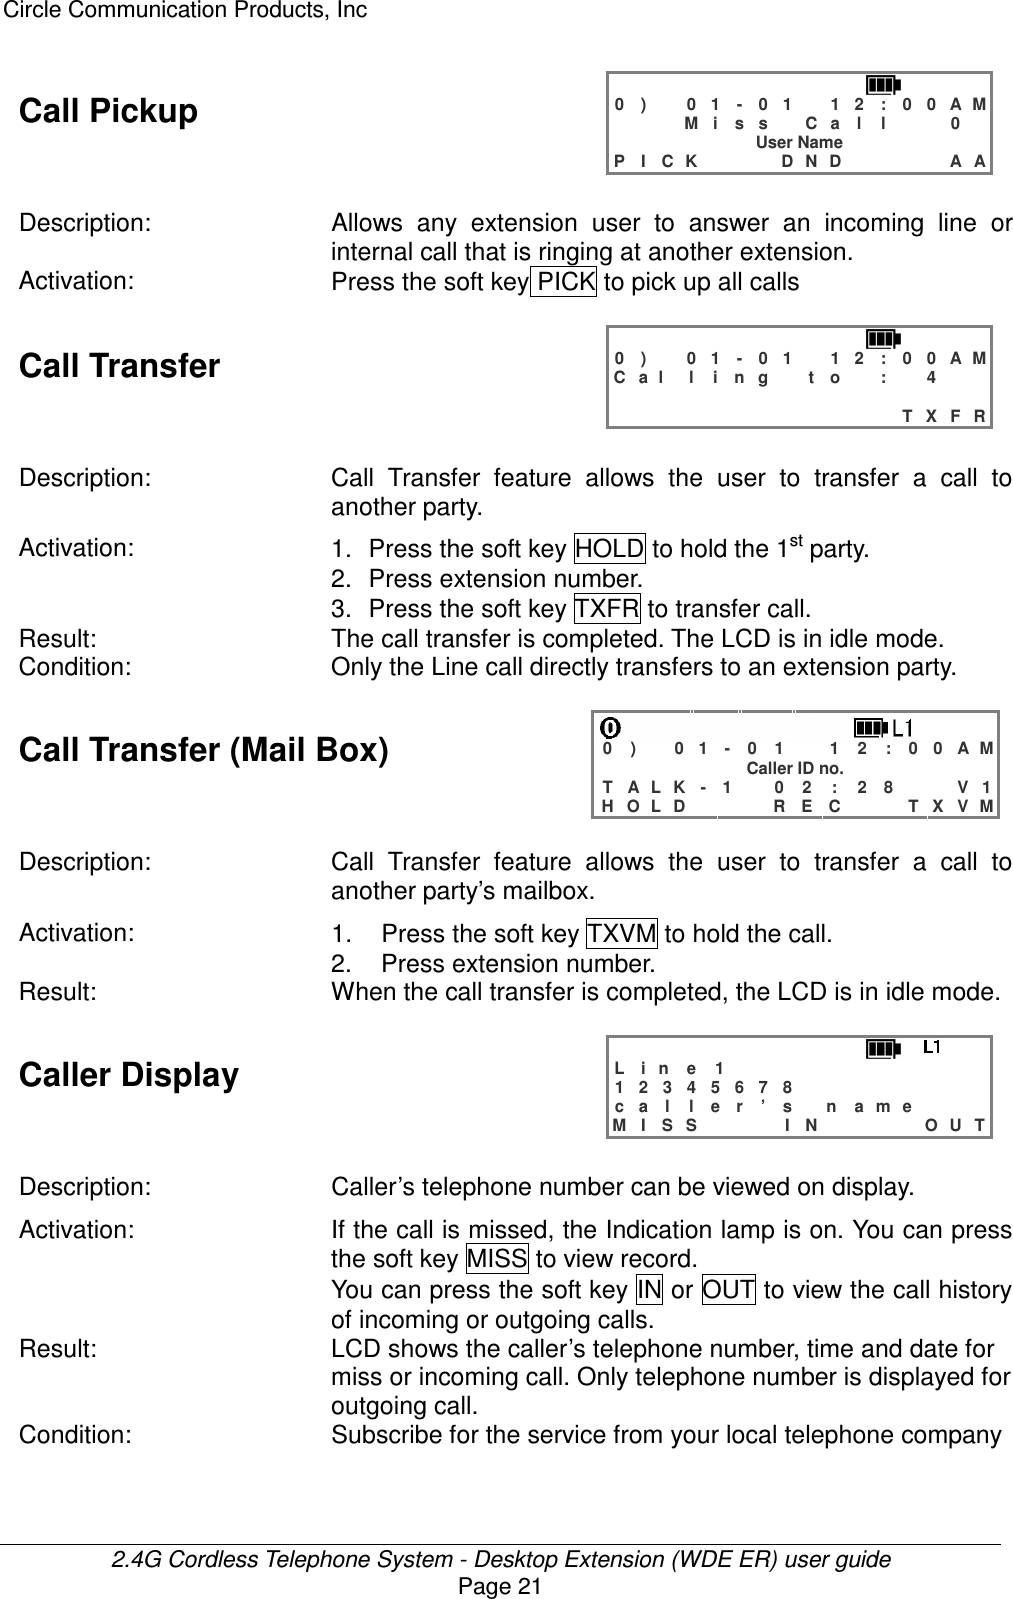 Circle Communication Products, Inc  2.4G Cordless Telephone System - Desktop Extension (WDE ER) user guide Page 21 Call Pickup   0 )   0 1 - 0 1  1 2 : 0 0 A M    M i s s  C a l l   0  User Name P I C K    D N D     A A  Description:  Allows  any  extension  user  to  answer  an  incoming  line  or internal call that is ringing at another extension. Activation:  Press the soft key PICK to pick up all calls  Call Transfer   0 )   0 1 - 0 1  1 2 : 0 0 A M C a l l i n g  t o  :  4                               T X F R  Description: Call  Transfer  feature  allows  the  user  to  transfer  a  call  to another party. Activation:  1.  Press the soft key HOLD to hold the 1st party. 2.  Press extension number. 3.  Press the soft key TXFR to transfer call. Result:  The call transfer is completed. The LCD is in idle mode. Condition:  Only the Line call directly transfers to an extension party.  Call Transfer (Mail Box)    0 )   0 1 - 0 1  1 2 : 0 0 A M Caller ID no. T A L K - 1   0 2 : 2 8   V 1 H O L D    R E C   T X V M  Description: Call  Transfer  feature  allows  the  user  to  transfer  a  call  to another party’s mailbox. Activation:  1.  Press the soft key TXVM to hold the call. 2.  Press extension number. Result:  When the call transfer is completed, the LCD is in idle mode.  Caller Display   L i n e   1            1 2 3 4 5 6 7 8         c a l l e r ’ s  n a m e    M I S S    I N     O U T  Description:  Caller’s telephone number can be viewed on display. Activation: If the call is missed, the Indication lamp is on. You can press the soft key MISS to view record. You can press the soft key IN or OUT to view the call history of incoming or outgoing calls. Result:  LCD shows the caller’s telephone number, time and date for miss or incoming call. Only telephone number is displayed for outgoing call. Condition:  Subscribe for the service from your local telephone company  